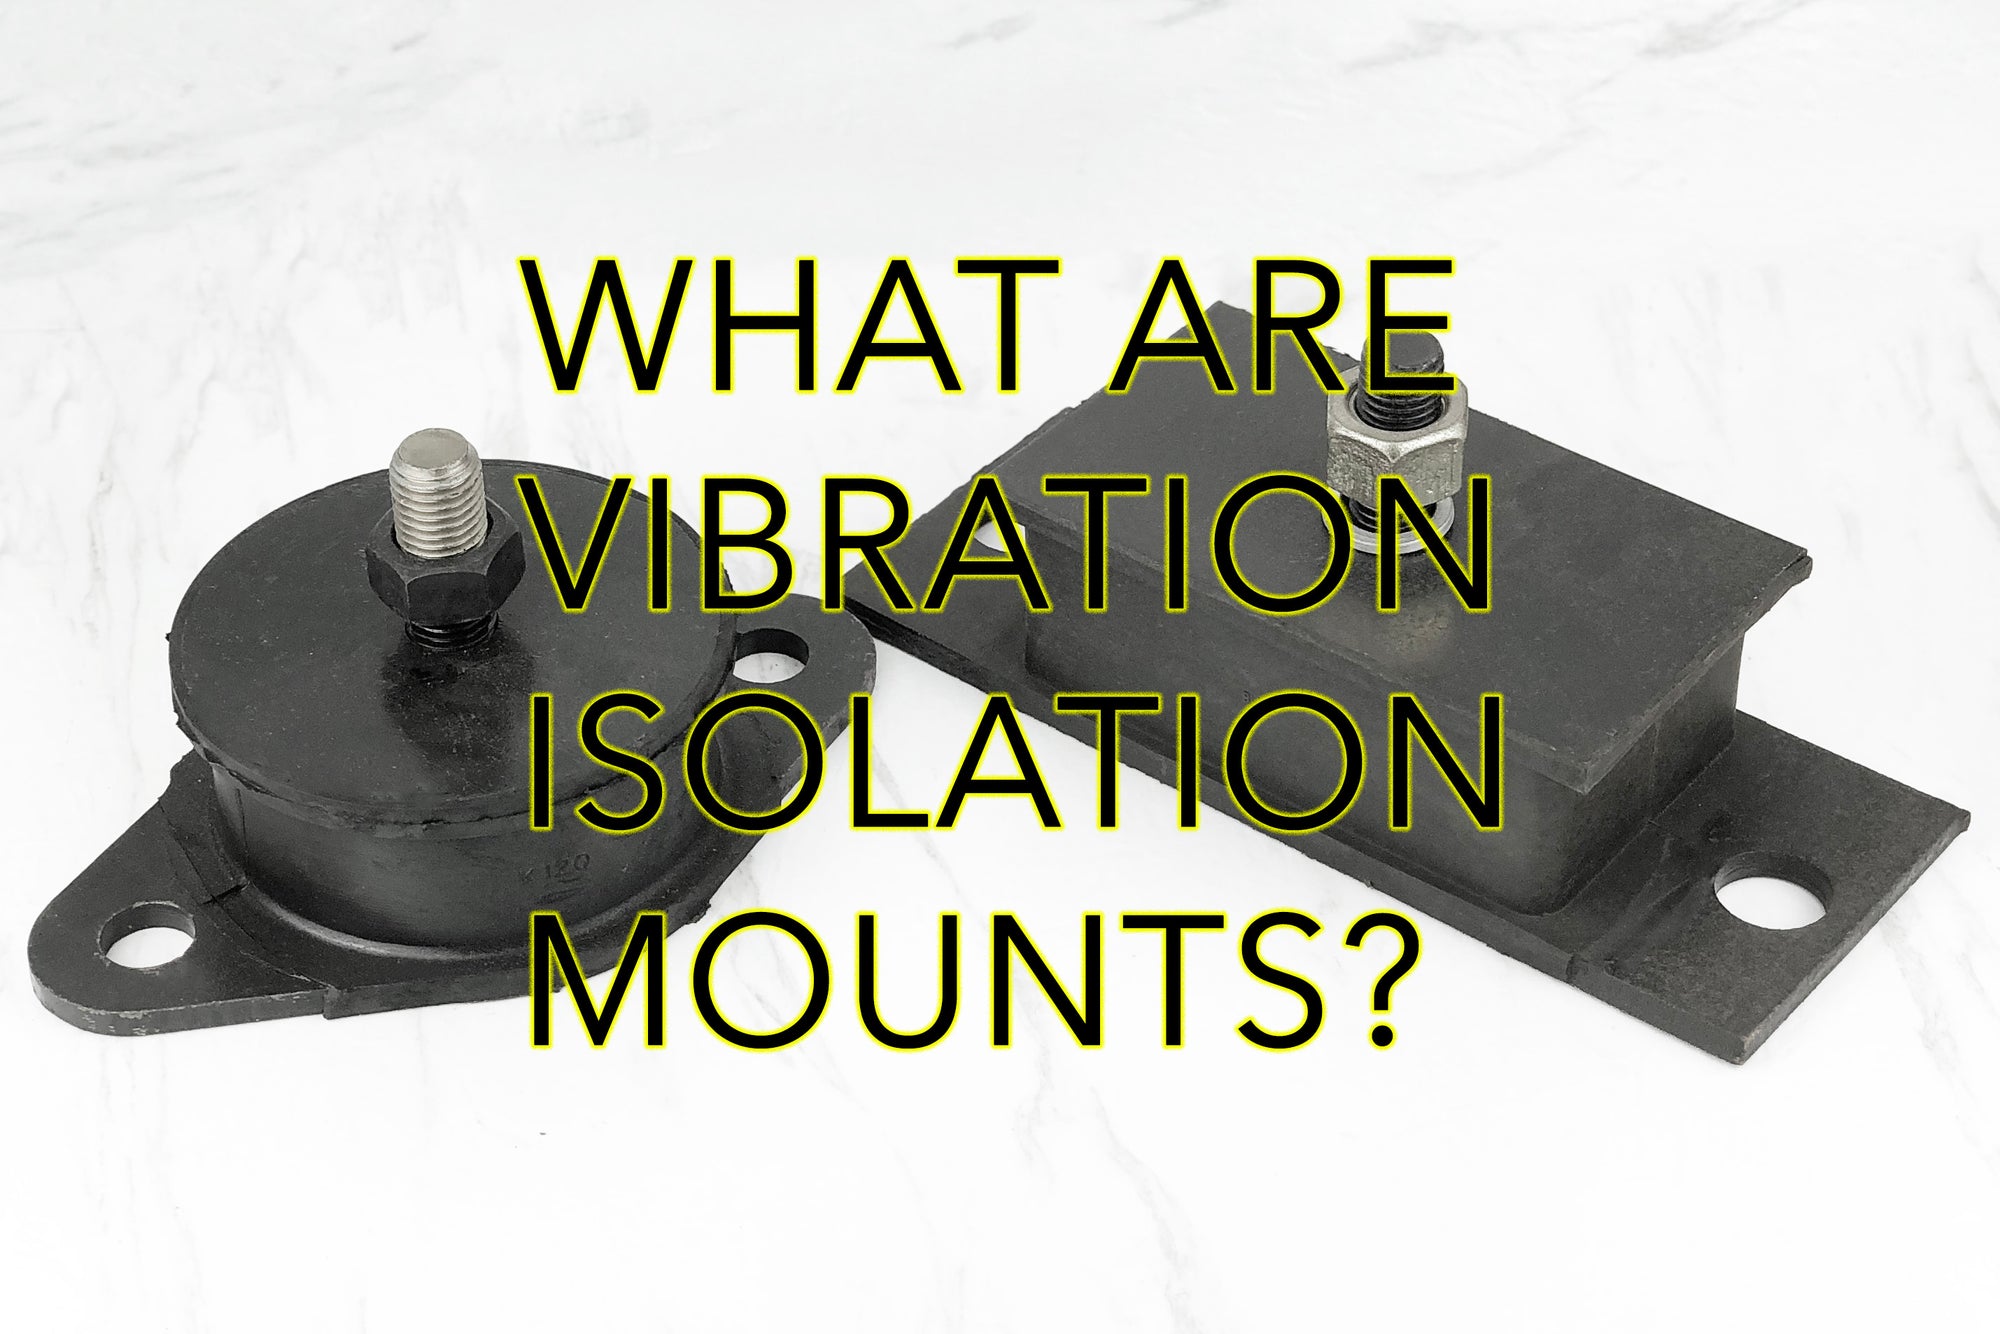 What Are Vibration Isolation Mounts?